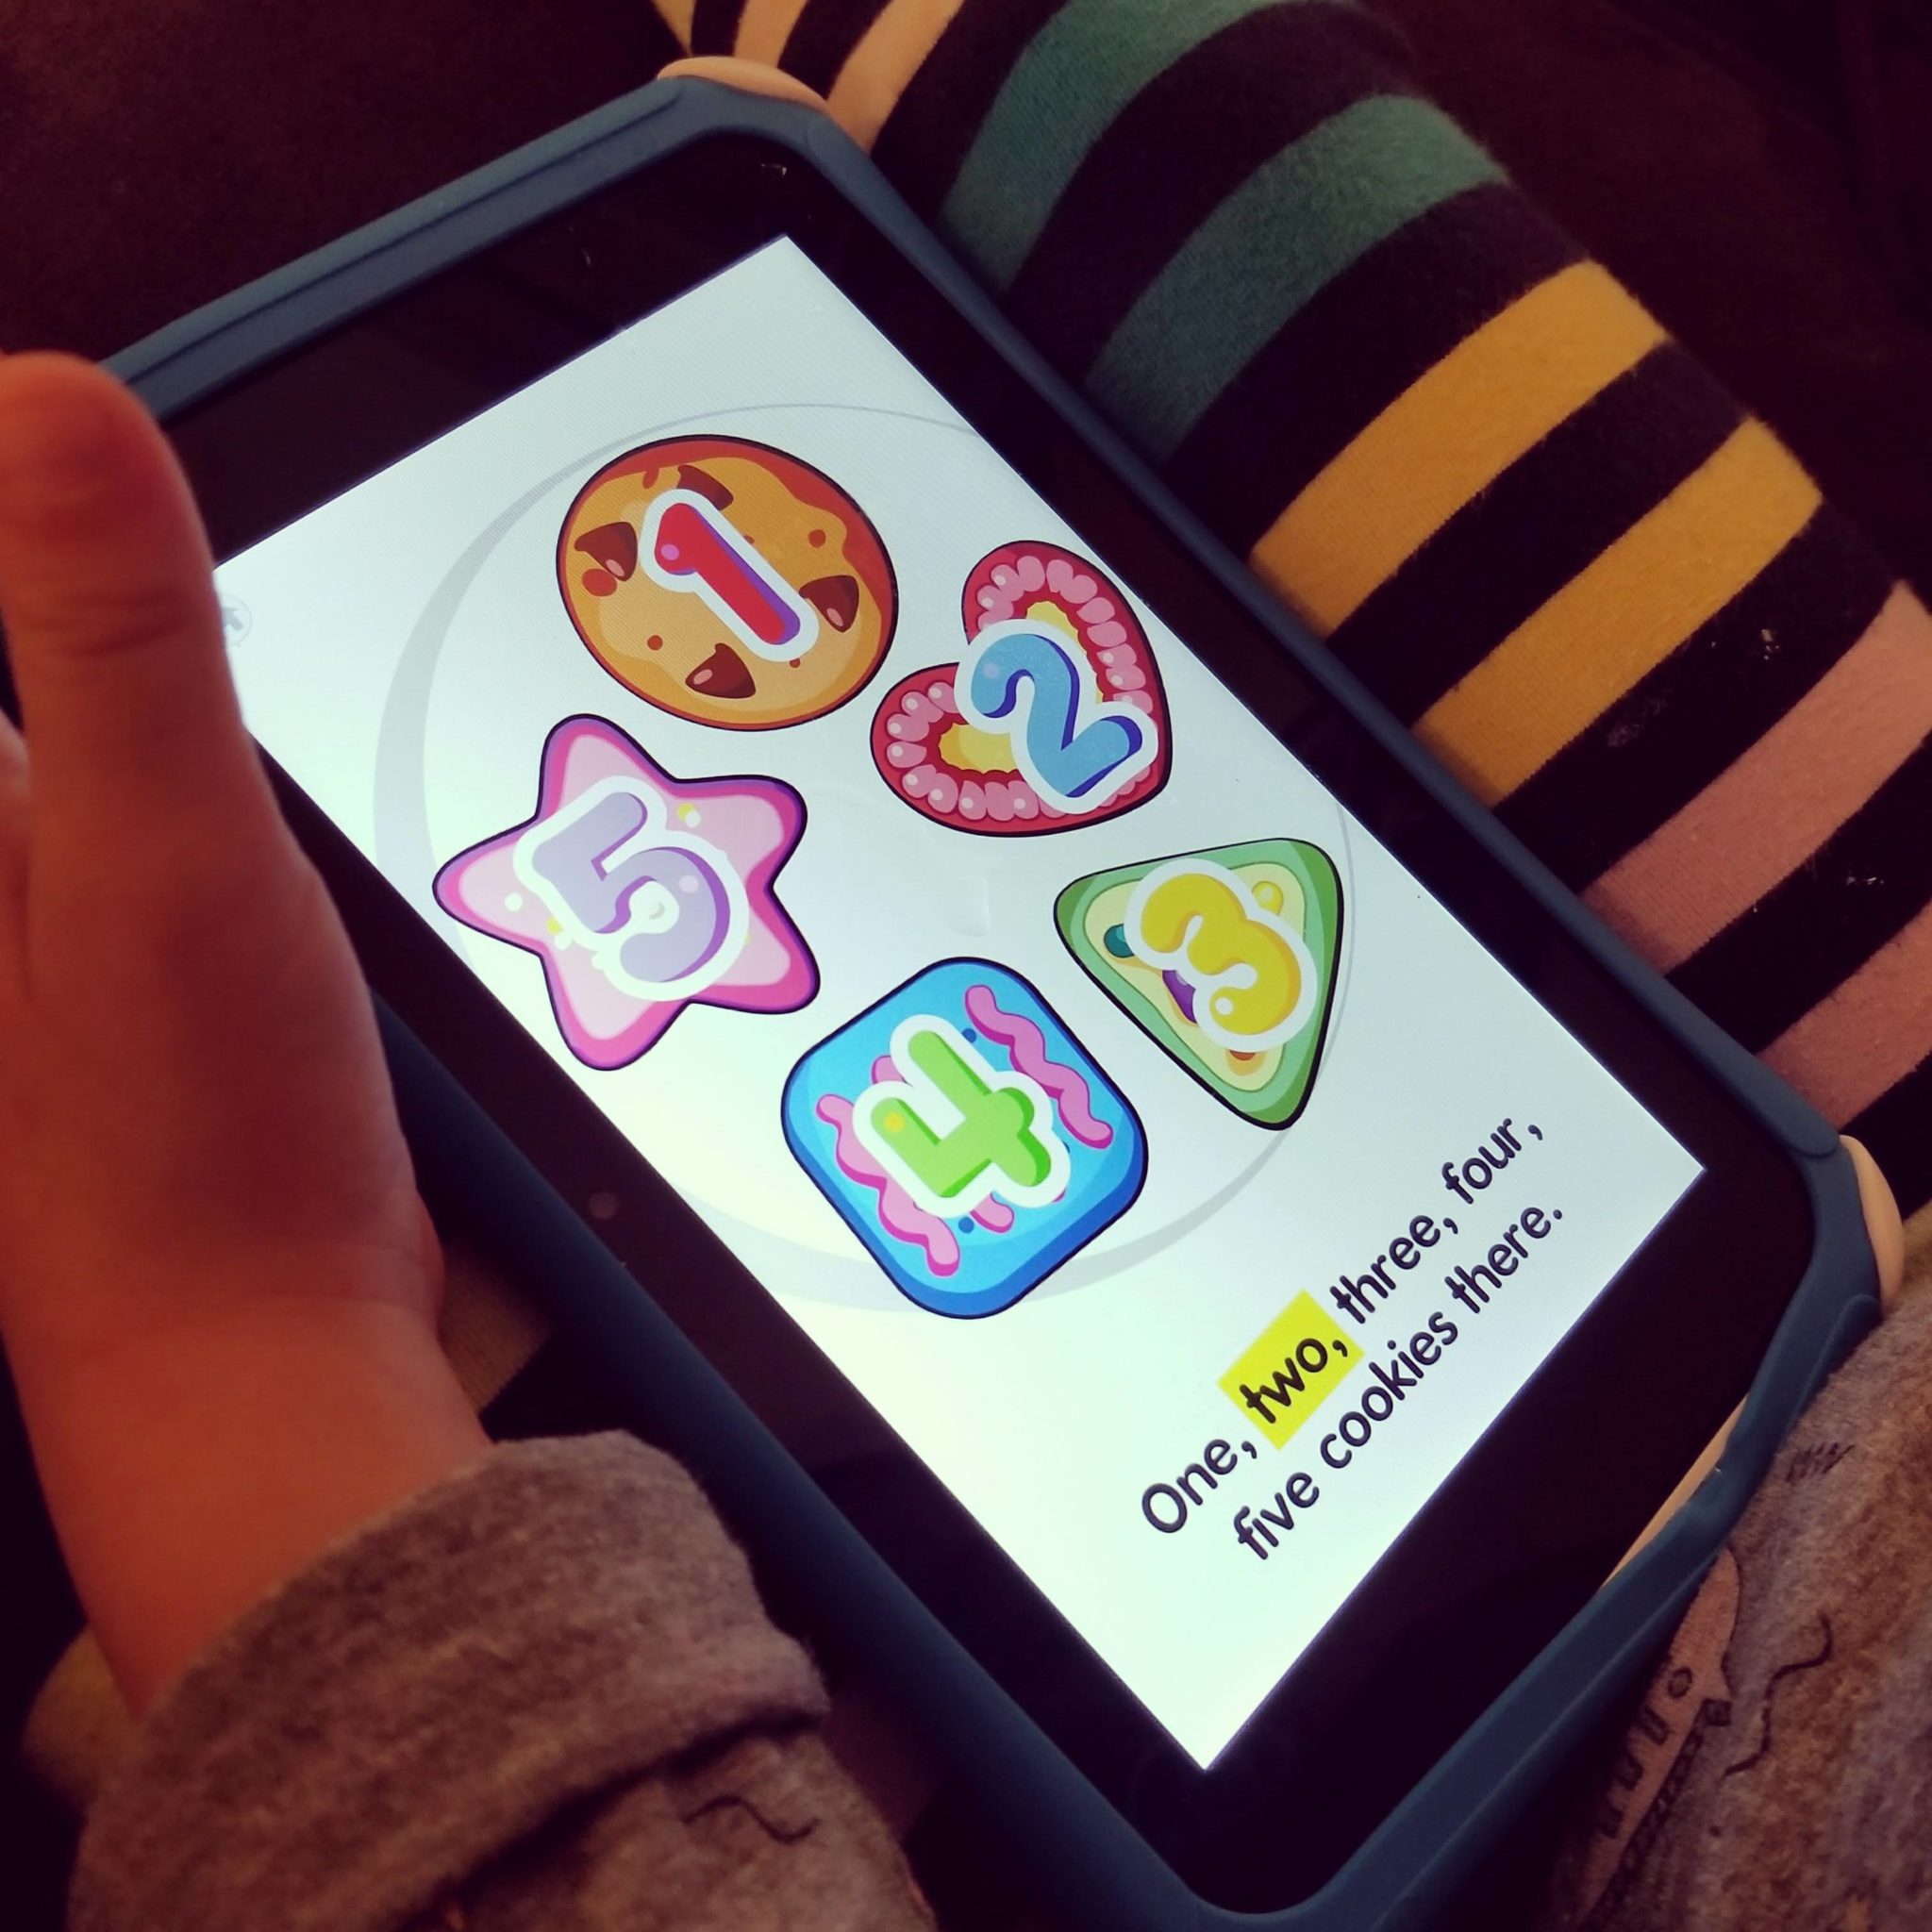 Fisher Price Tablet powered by nabi